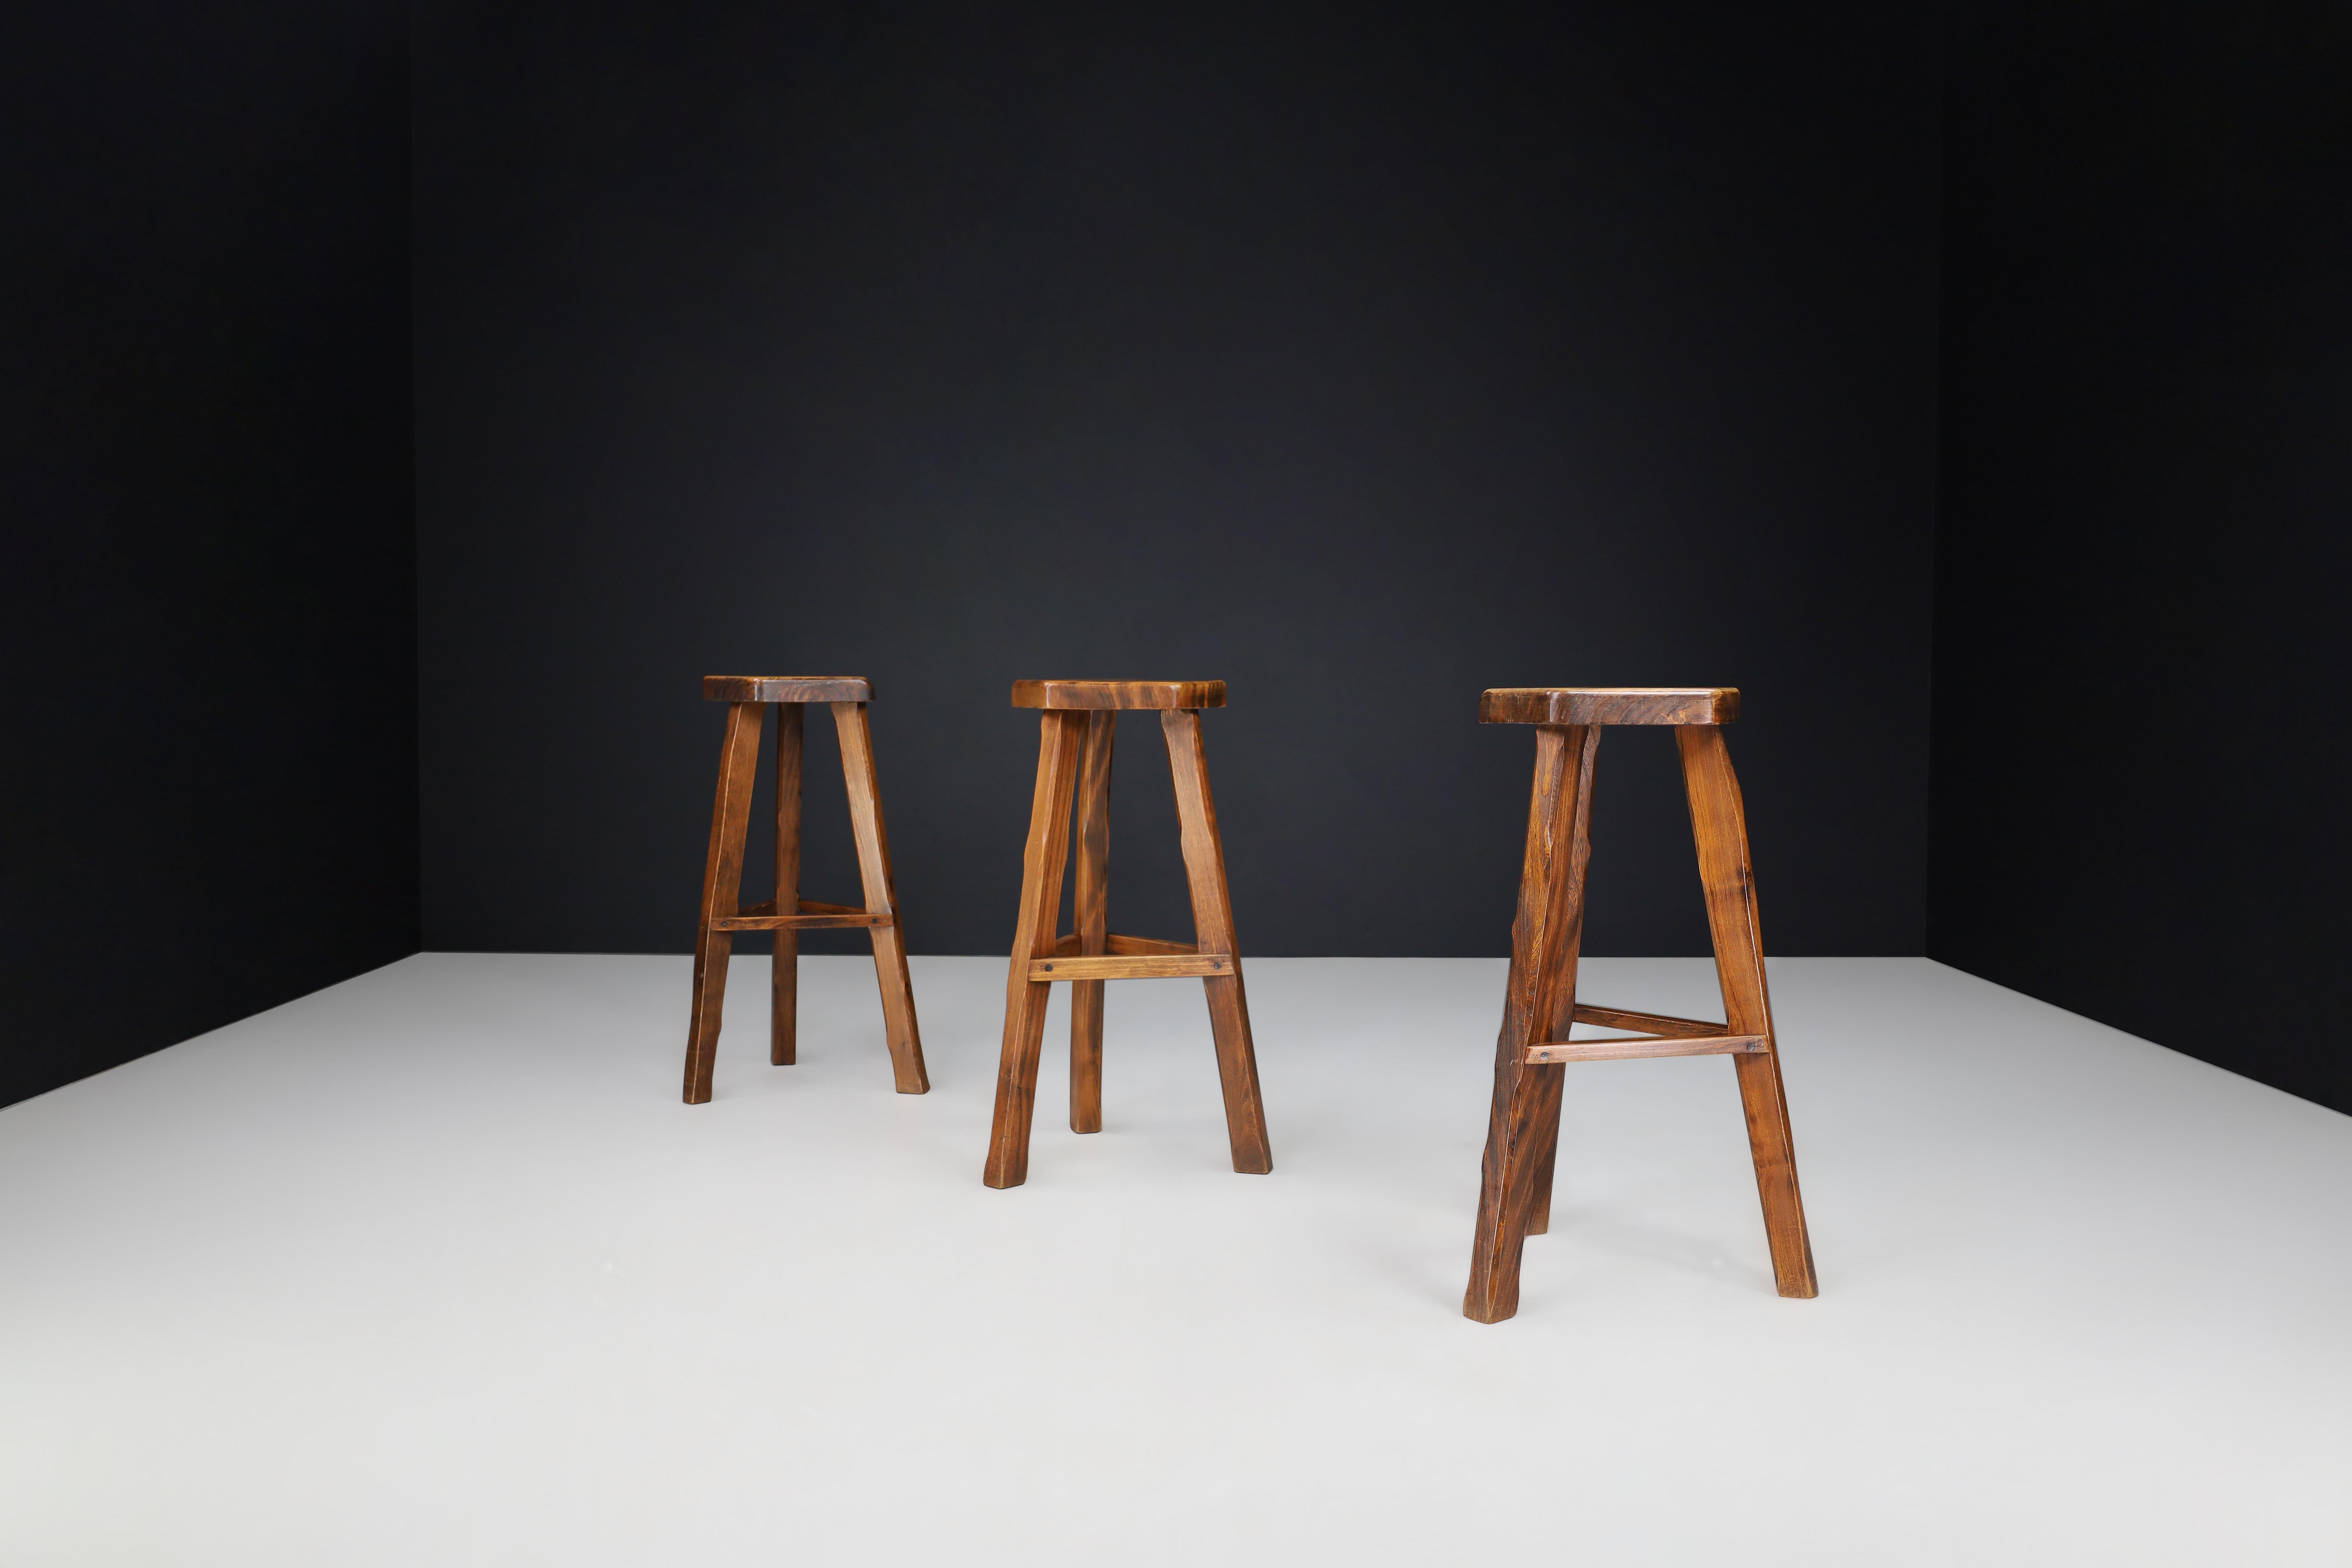 Olavi Hänninen Brutalist Elm Wood Bar Stools, Finland 1960s 

These set of 3 bar stools, crafted by Finnish designer Olavi Hänninen in the 1960s, boast unique warm tones due to their dark stained Elm wood construction. Hand-carved with precision,